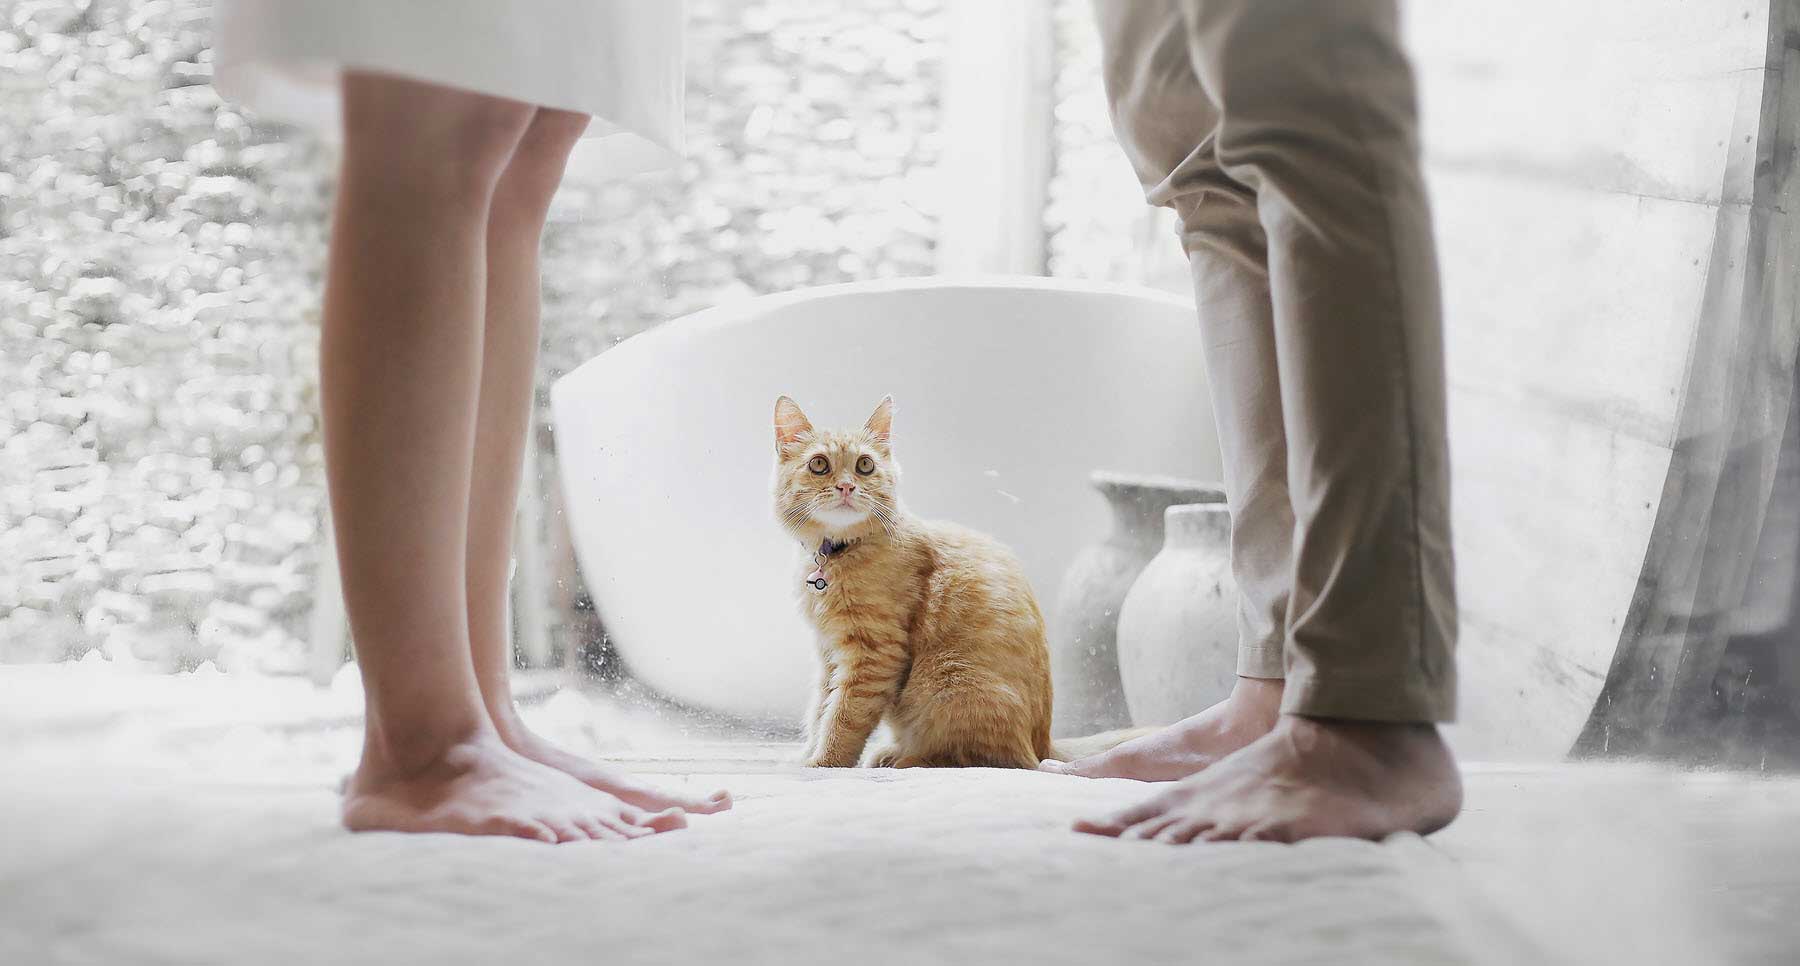 Orange cat between 2 adults symbolizes how children feel about their parents divorce